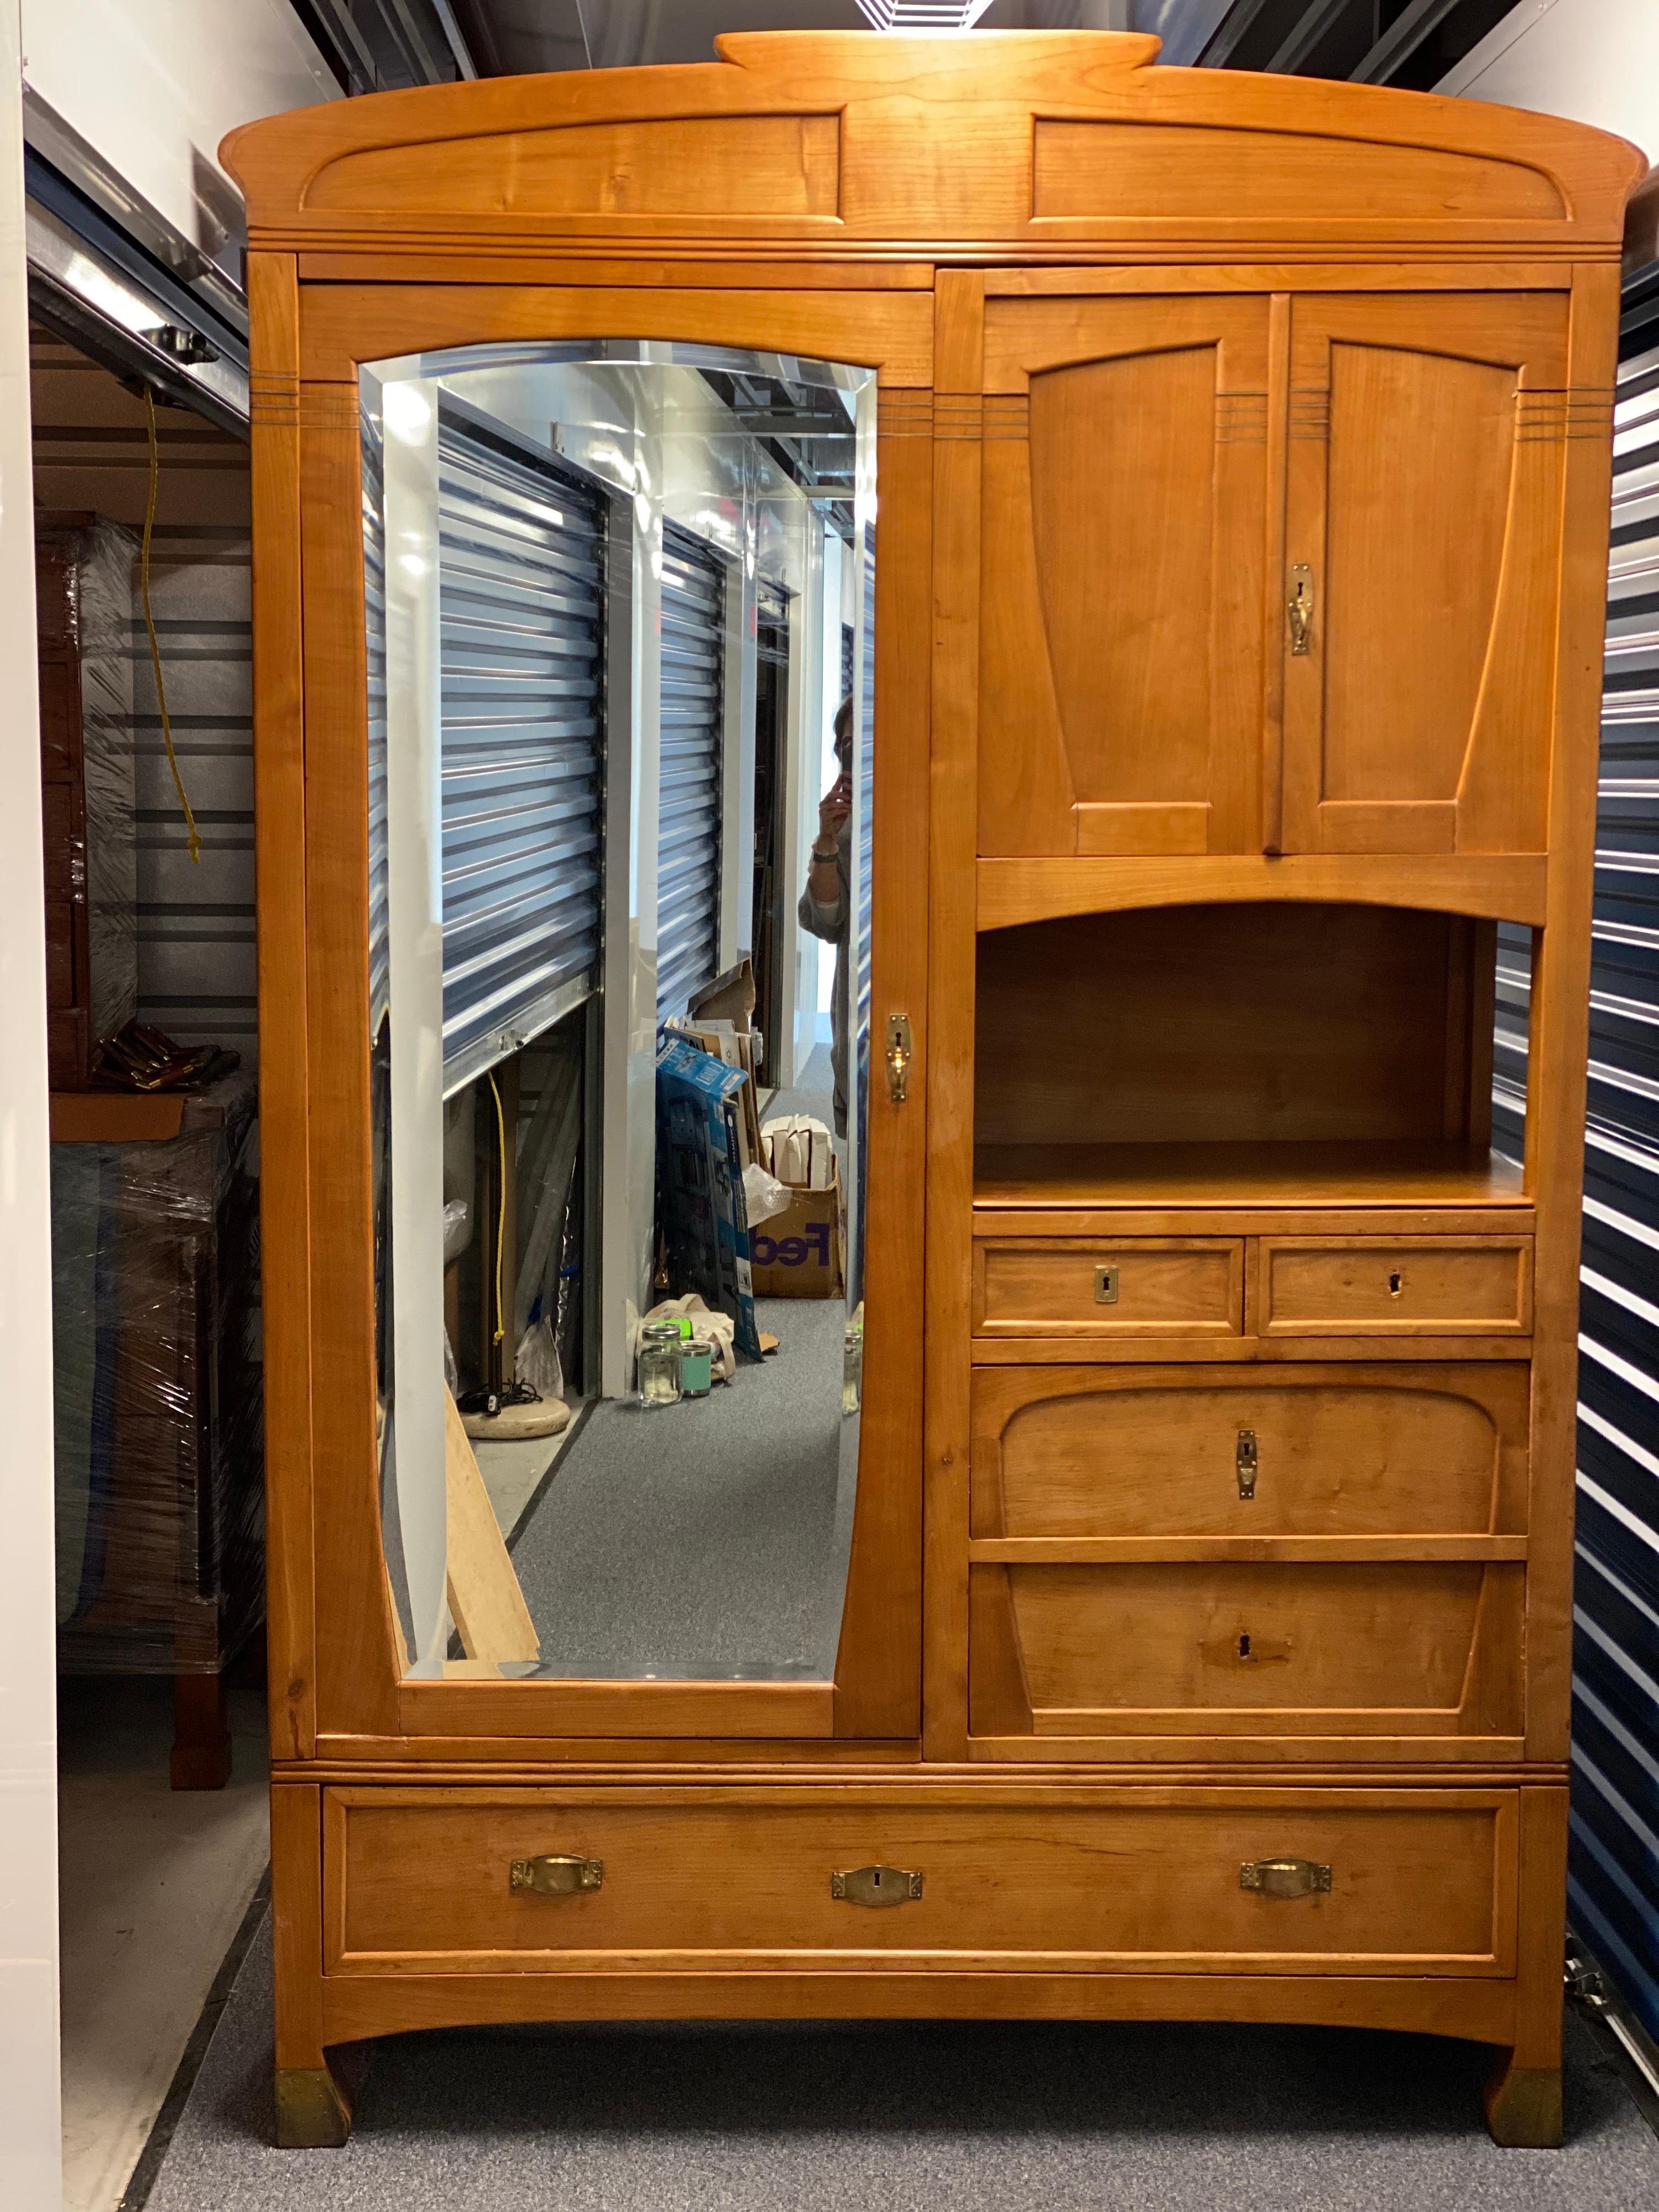 Italian Art Nouveau Ash Armoire Wardrobe, c. 1900

The Art Nouveau cabinet from circa 1900 thought to be made in Italy. The details show a refined restrained elegance reflecting the Art Nouveau style in a clean modern reflection. It is made in solid